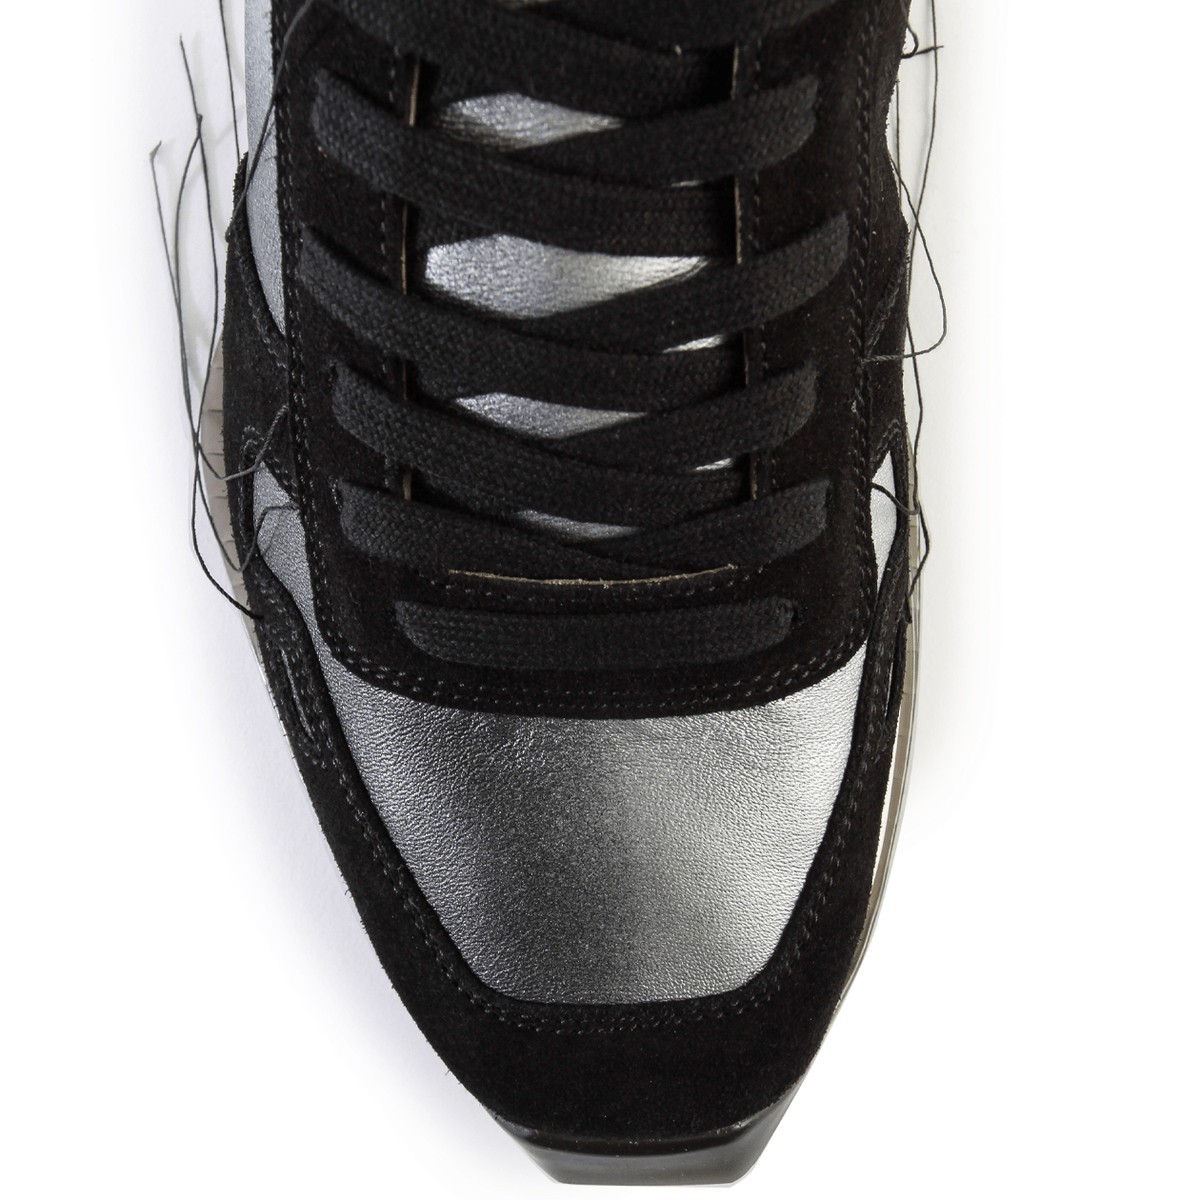 BNWT AW19 RICK OWENS "LARRY" NEW VINTAGE RUNNER LACE UP 44 - 16